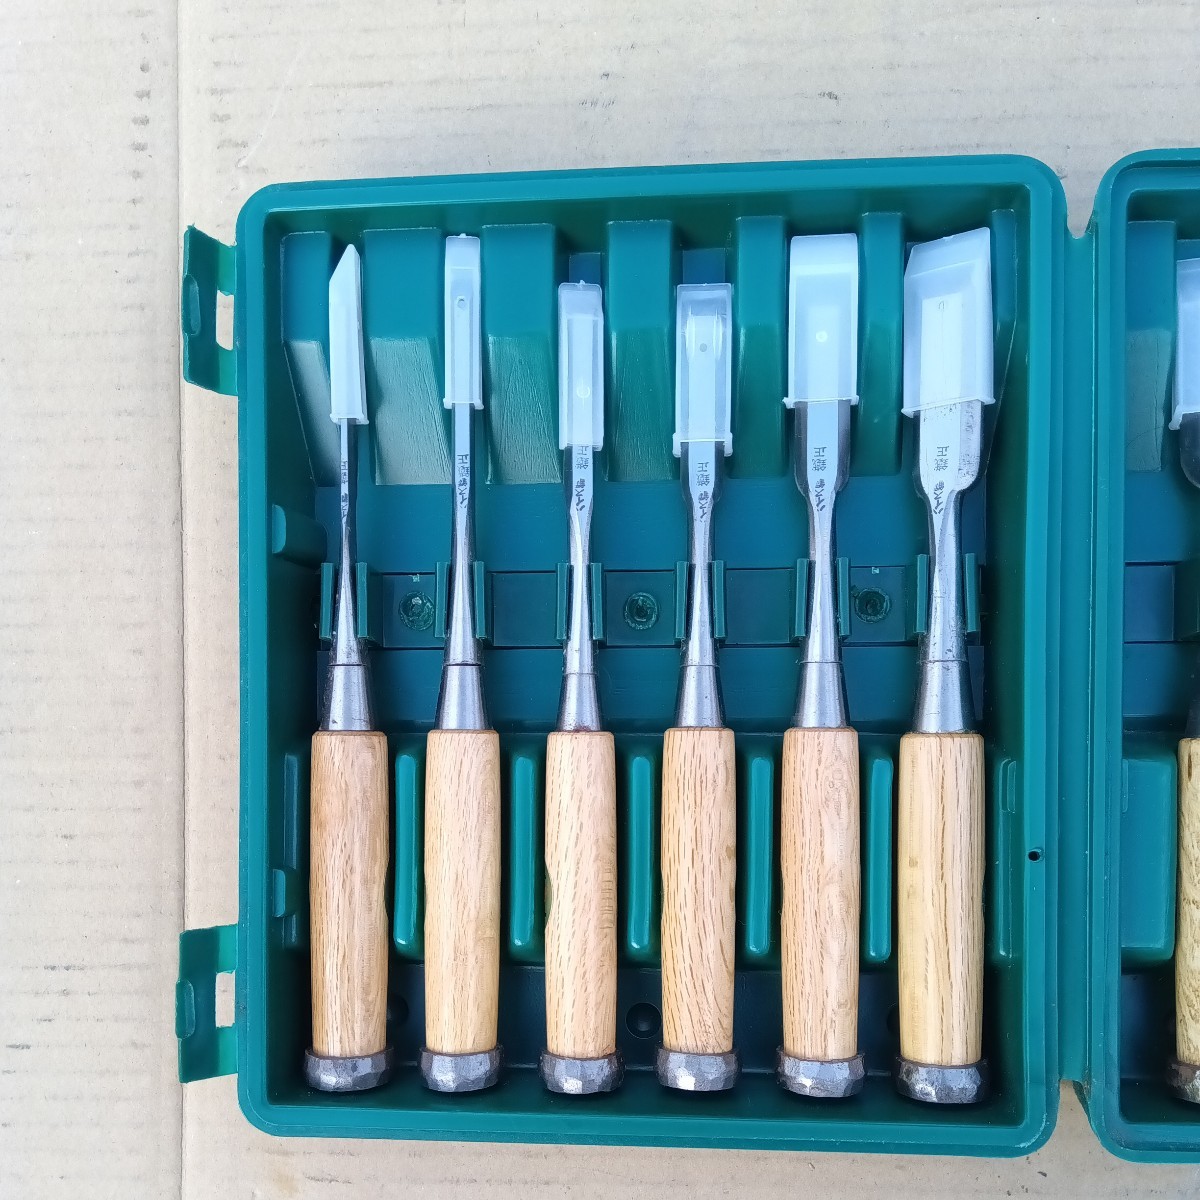  great special price!!! * price cut 26000 jpy * blue .. regular work is chair steel tree pattern only . 10 pcs set carpenter's tool 